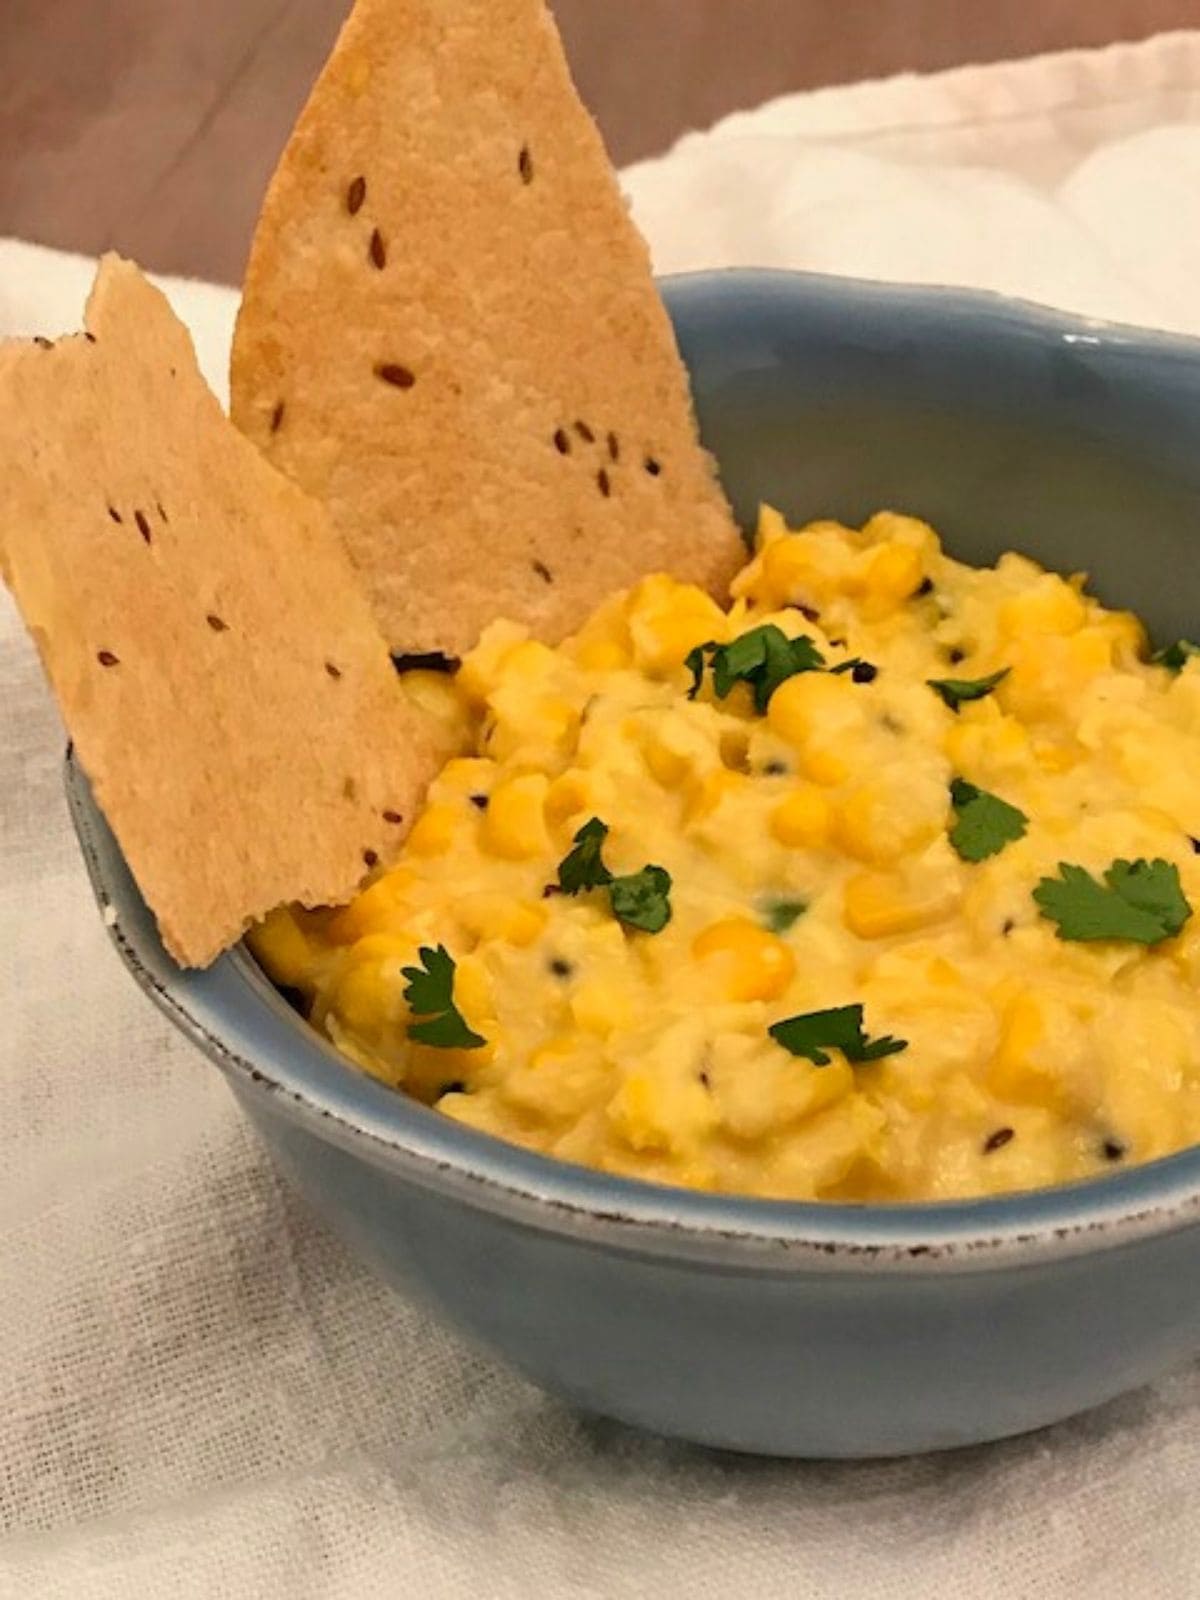 corn dip in a blue bowl with indian crispbread